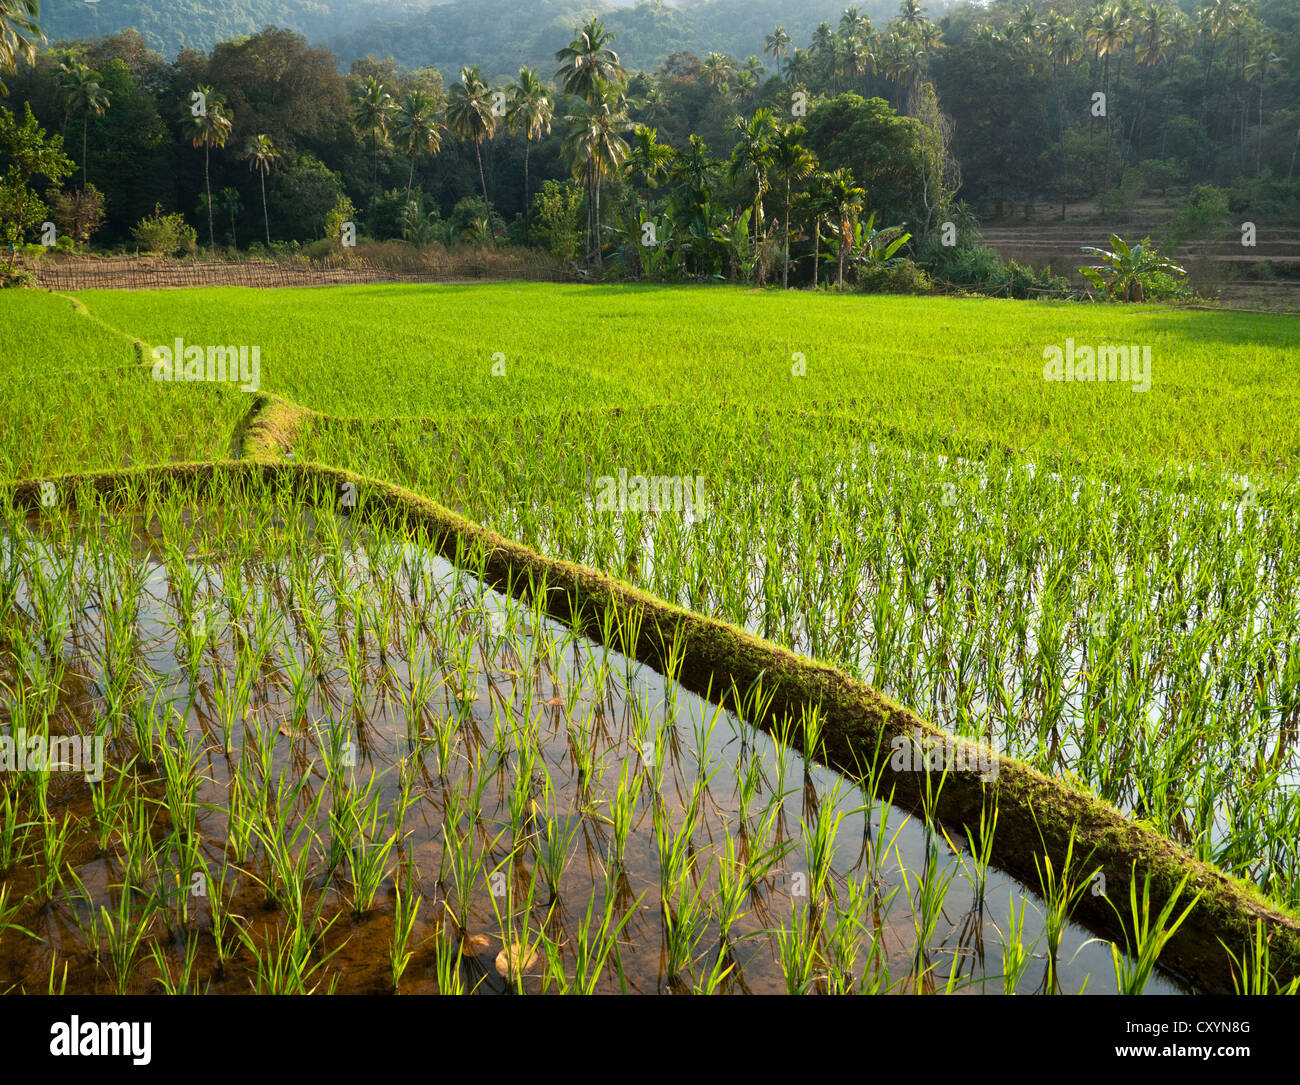 Rice being farmed on terraced rice paddies in India Asia Stock Photo